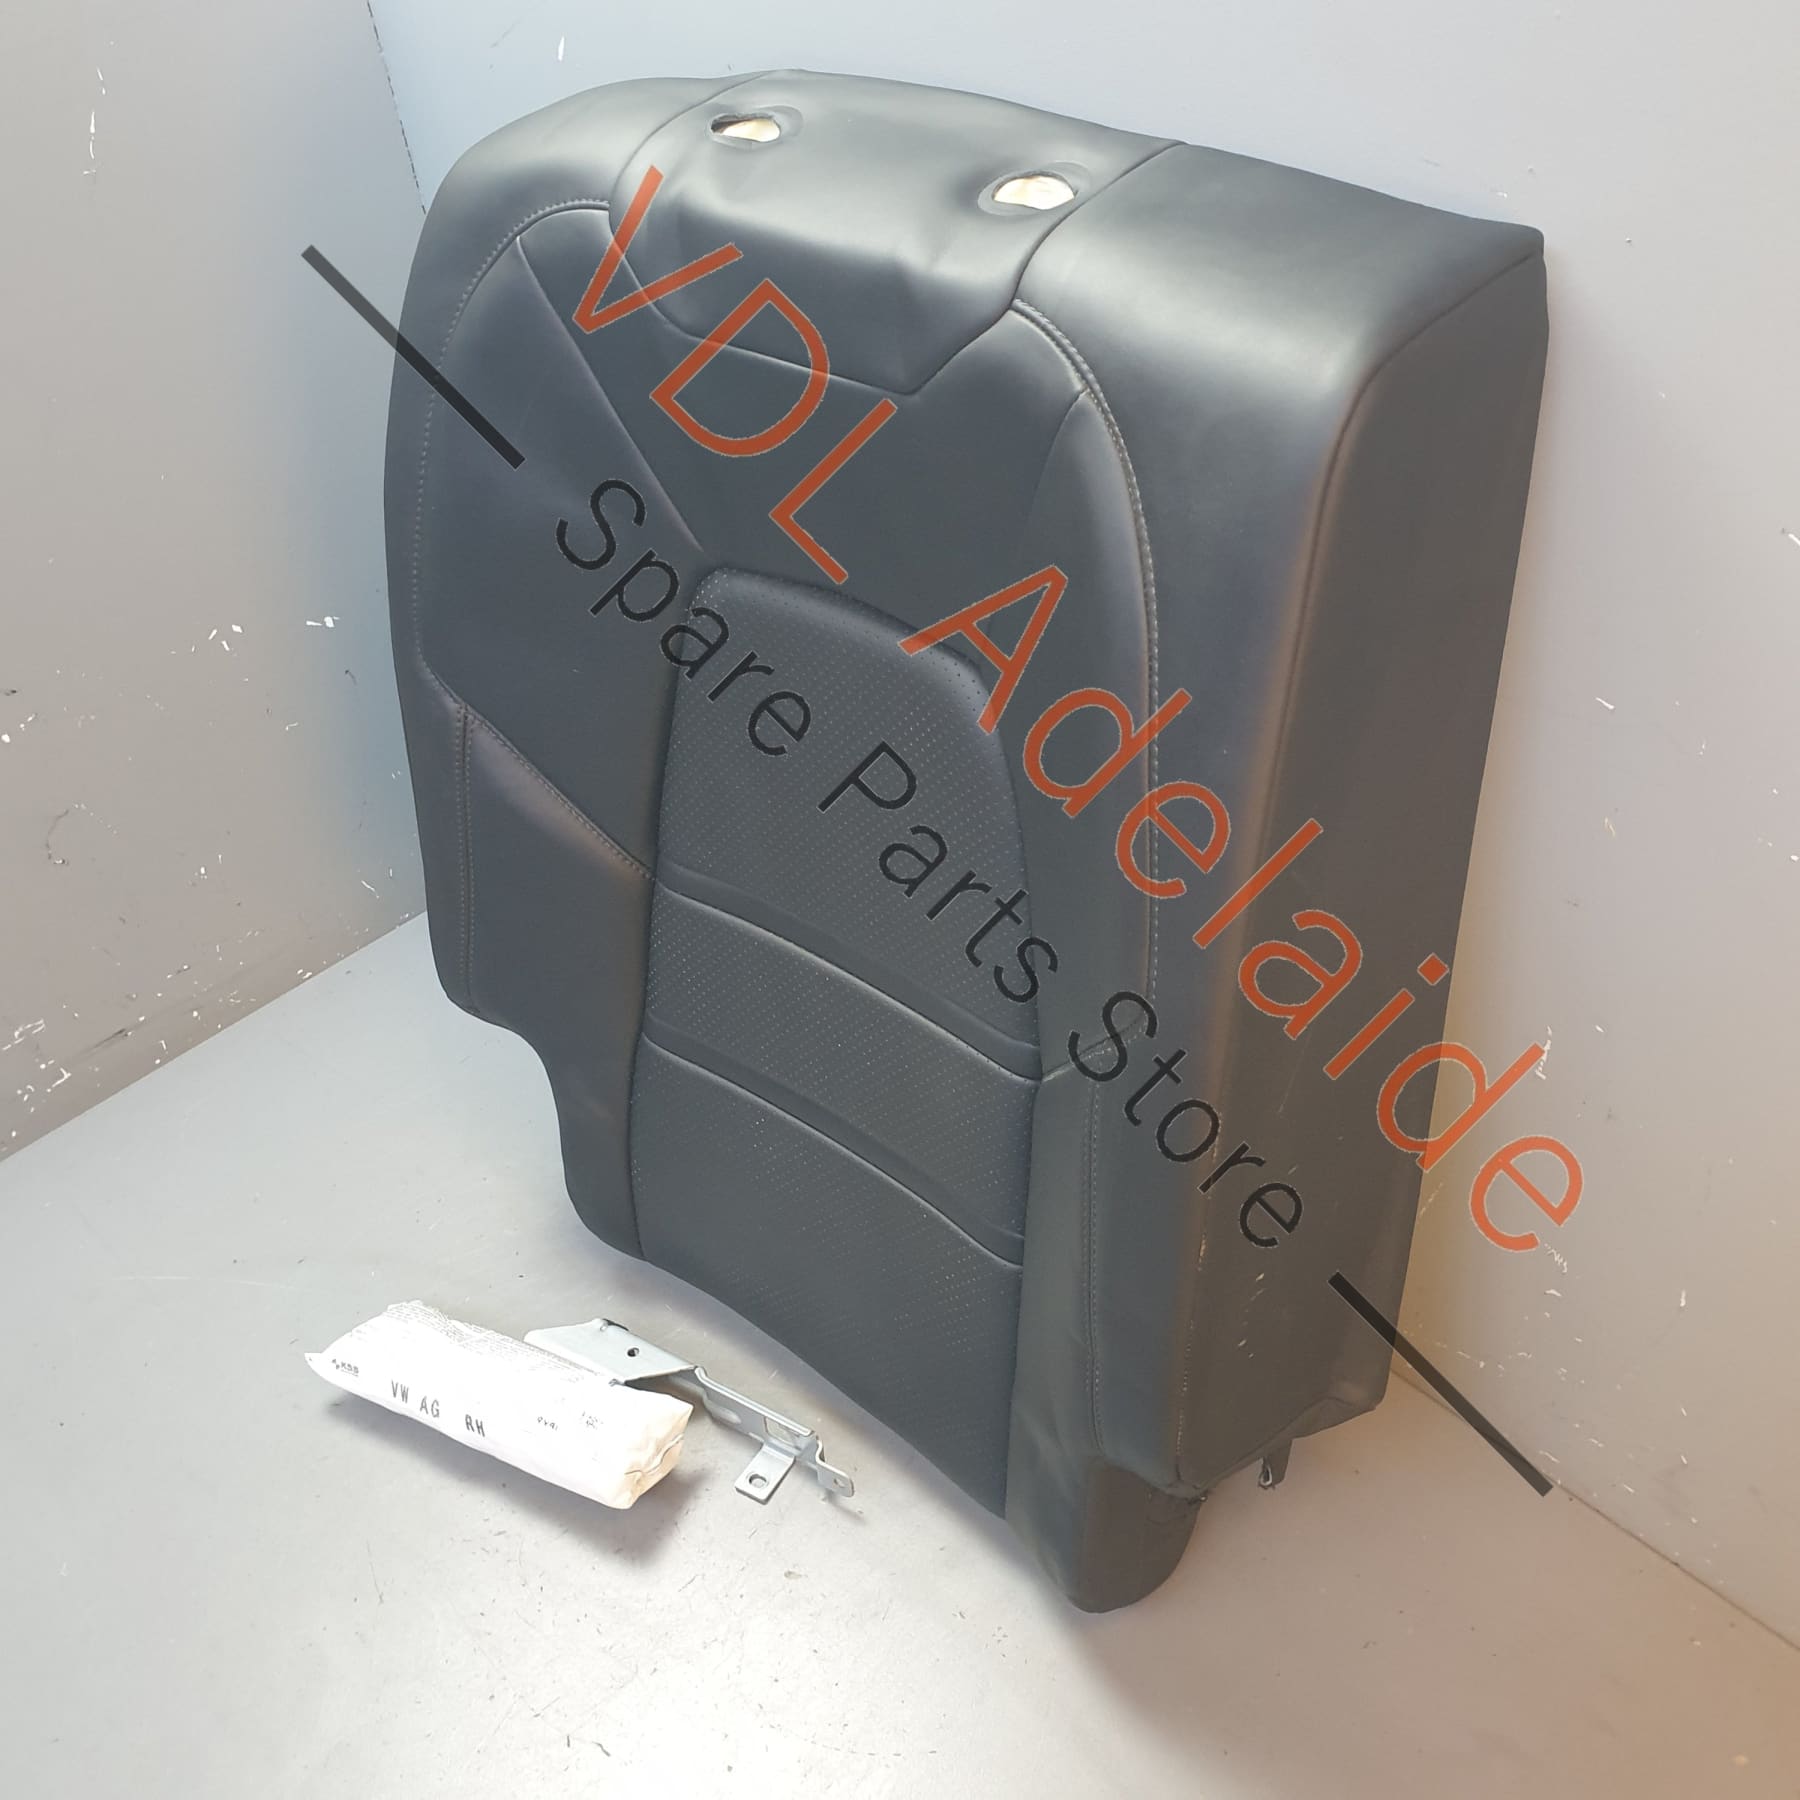 9Y0880442E 9Y0880442F 9Y0971386T Porsche Cayenne E3 9YA 9YB Rear Right Seat Airbag Kit with Smooth Leather Cover 9Y0880442D 9Y0885806AN 8YR